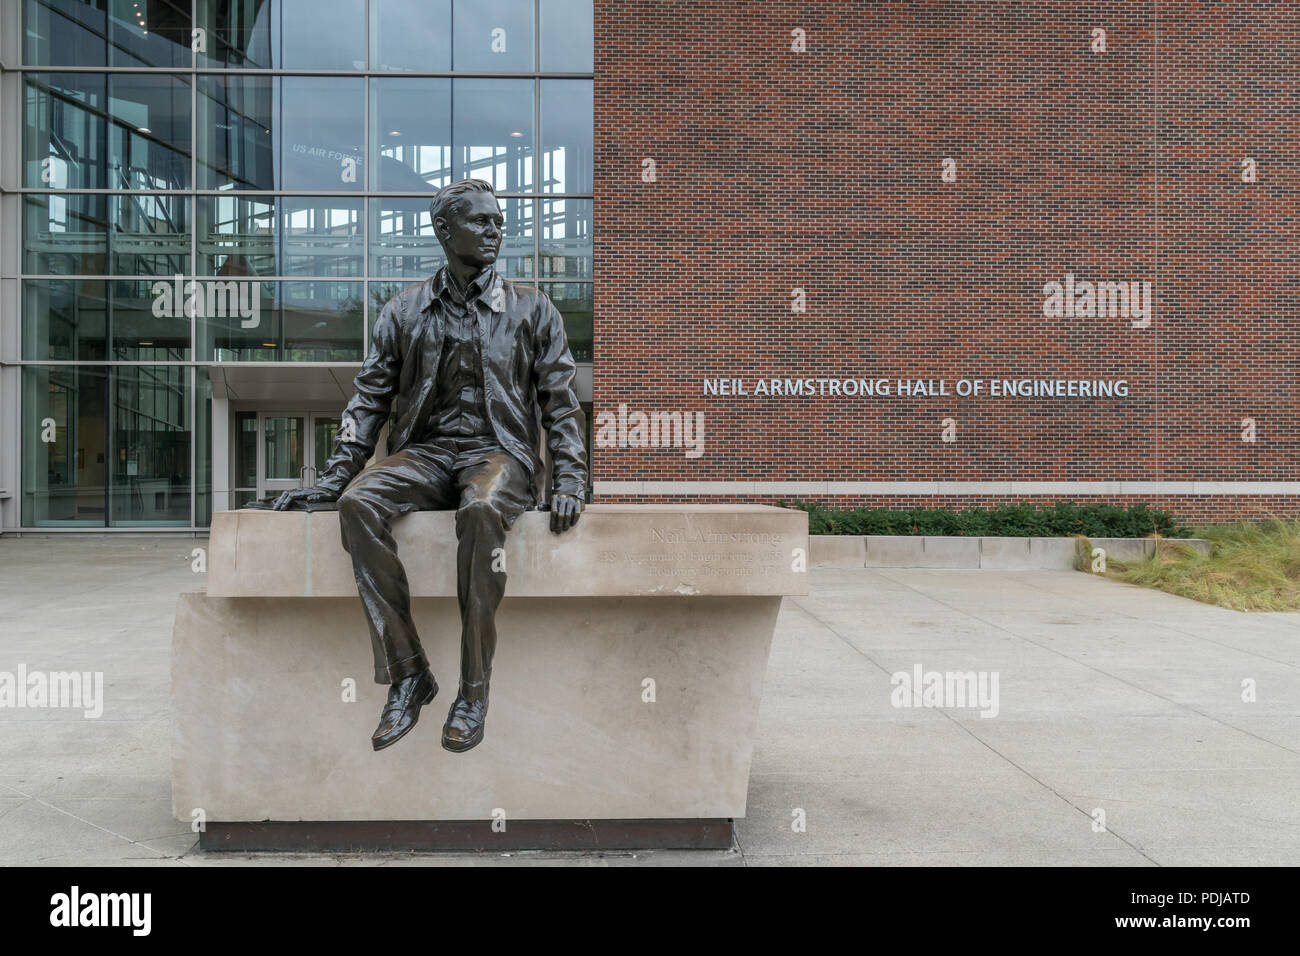 WEST LAFAYETTE, IN/USA - OCTOBER 22, 2017: Bronze sculpture of Neil Armstrong before the Neil Armstrong Hall of Engineering on the campus of the Purdu Stock Photo